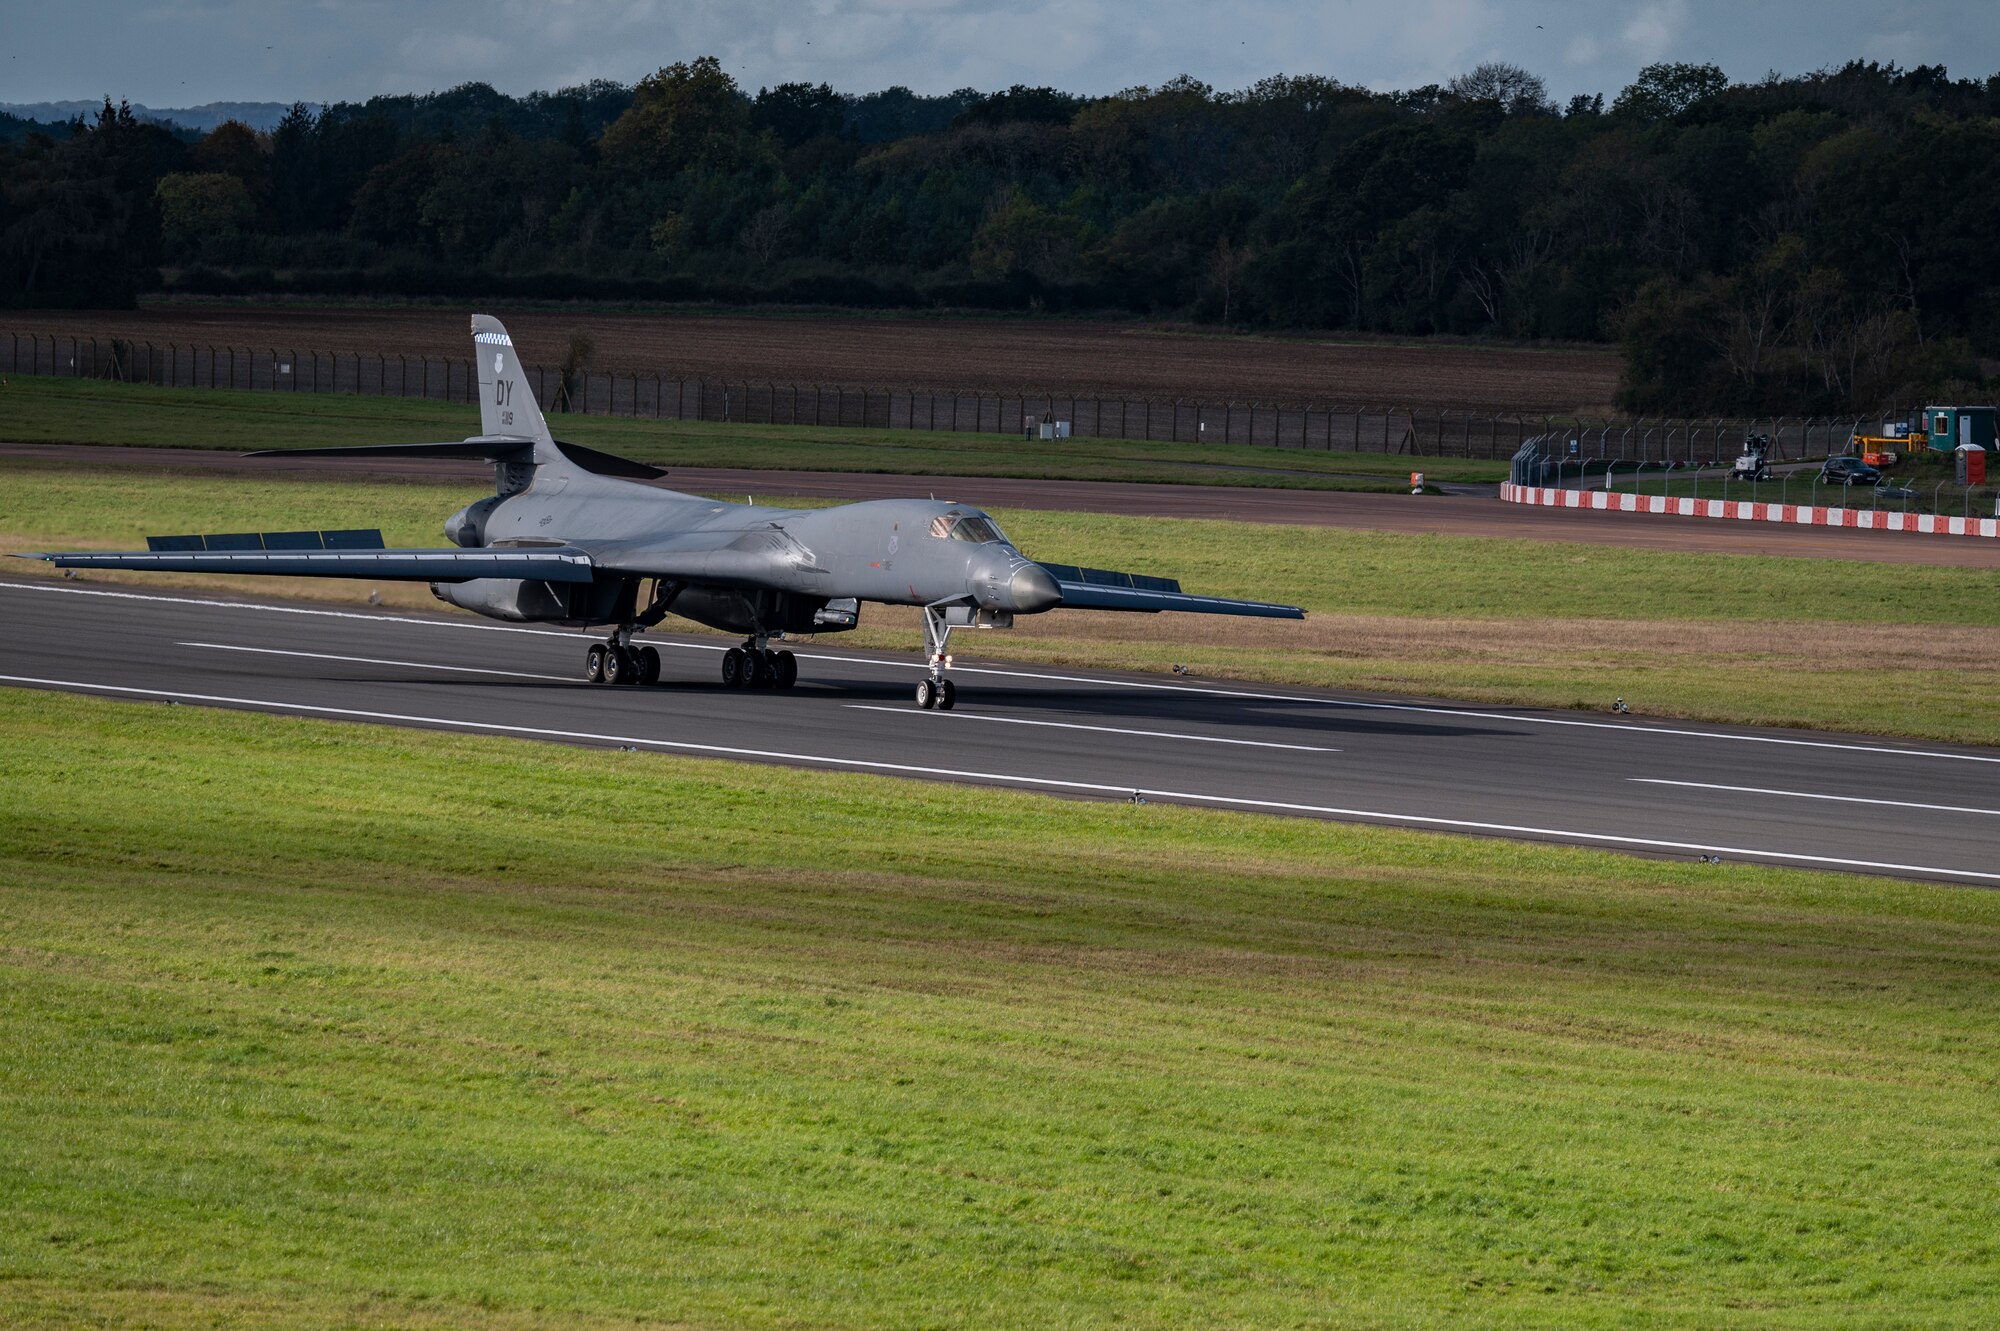 A B-1B Lancer assigned to the 9th Expeditionary Bomb Squadron lands at RAF Fairford, United Kingdom, Oct. 24, 2023. U.S. Air Forces in Europe routinely hosts and supports a variety of U.S. Air Force aircraft and units for training to support geographic combatant command objectives. Operating with a variety of aircraft and units in Europe aids in maintaining a ready and postured force prepared to respond to and support global operations. (U.S. Air Force Photo by Senior Airman Ryan Hayman)